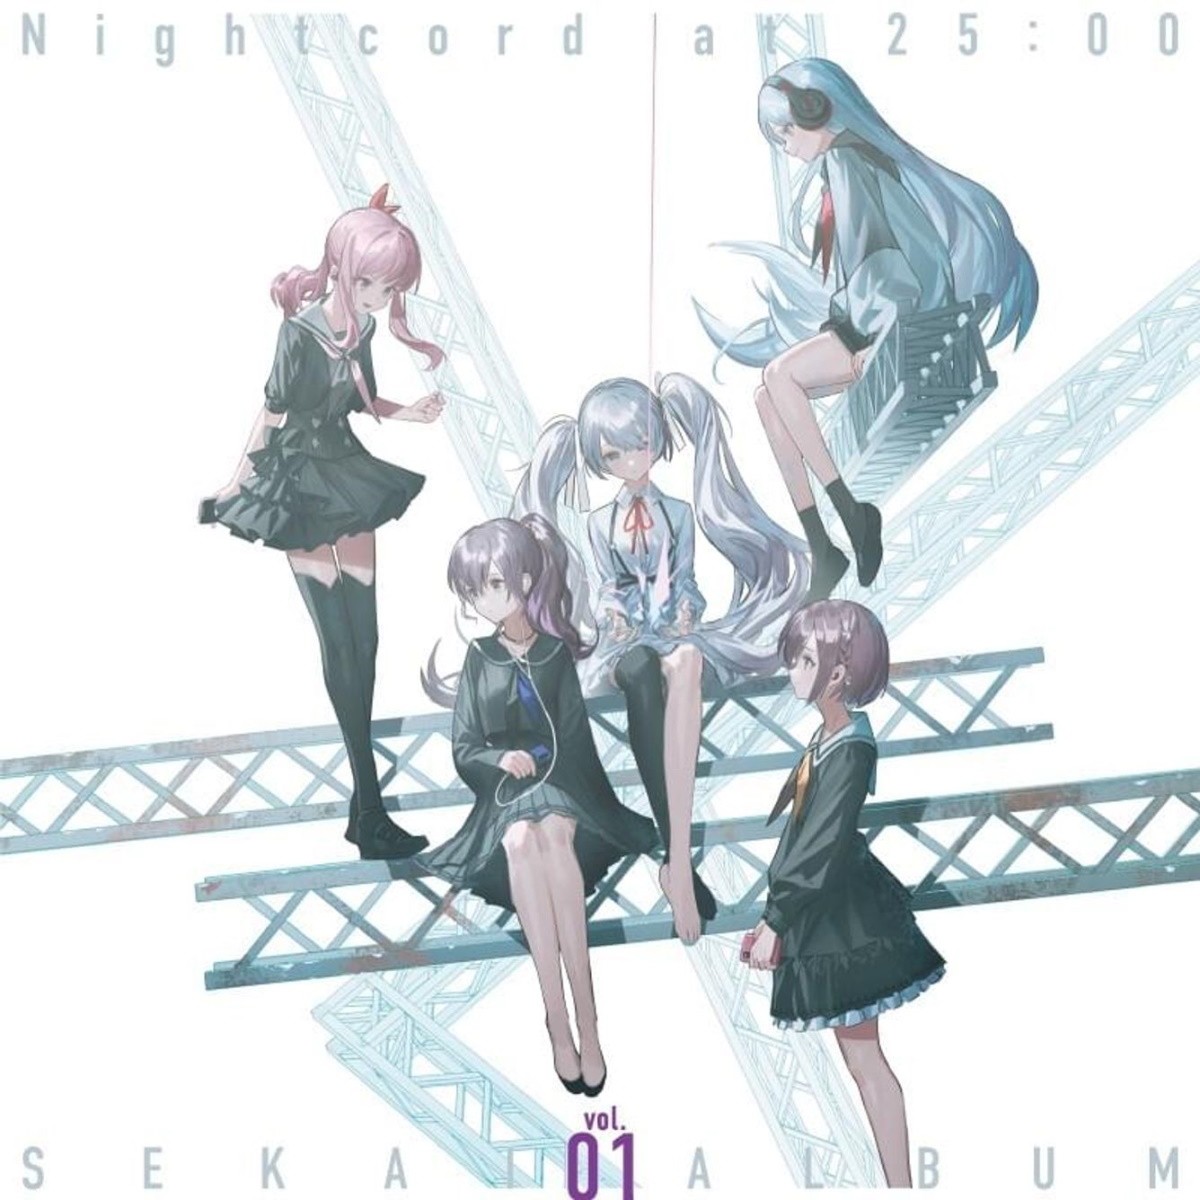 Cover for『Nightcord at 25:00 - Otome Dissection』from the release『Nightcord at 25:00 SEKAI ALBUM vol.1』